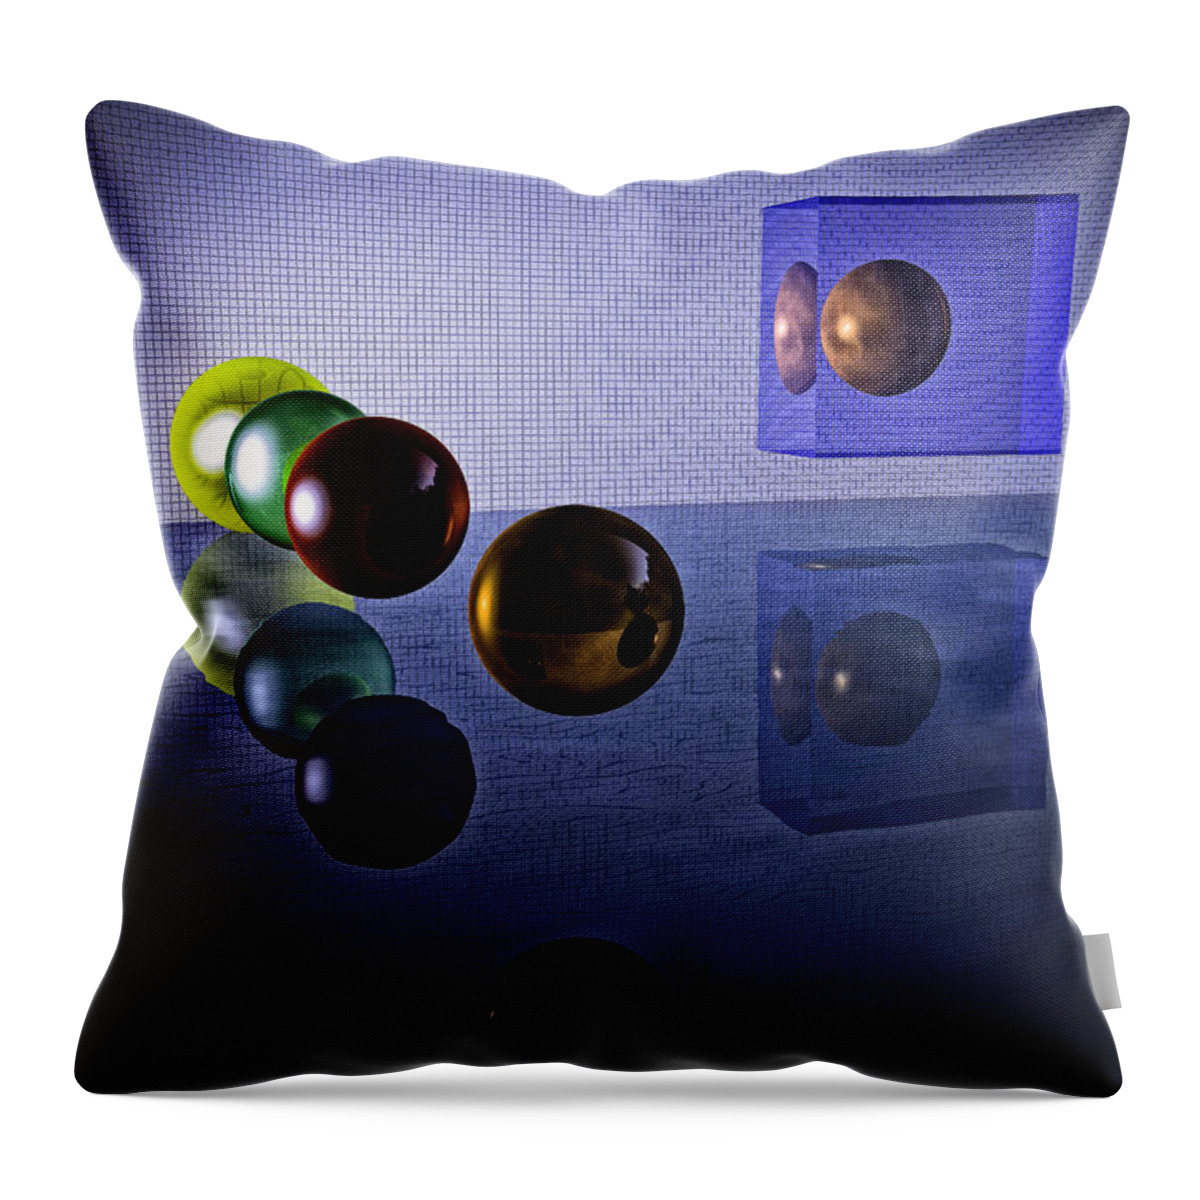 Reflections Throw Pillow featuring the digital art Reflections I by Ramon Martinez